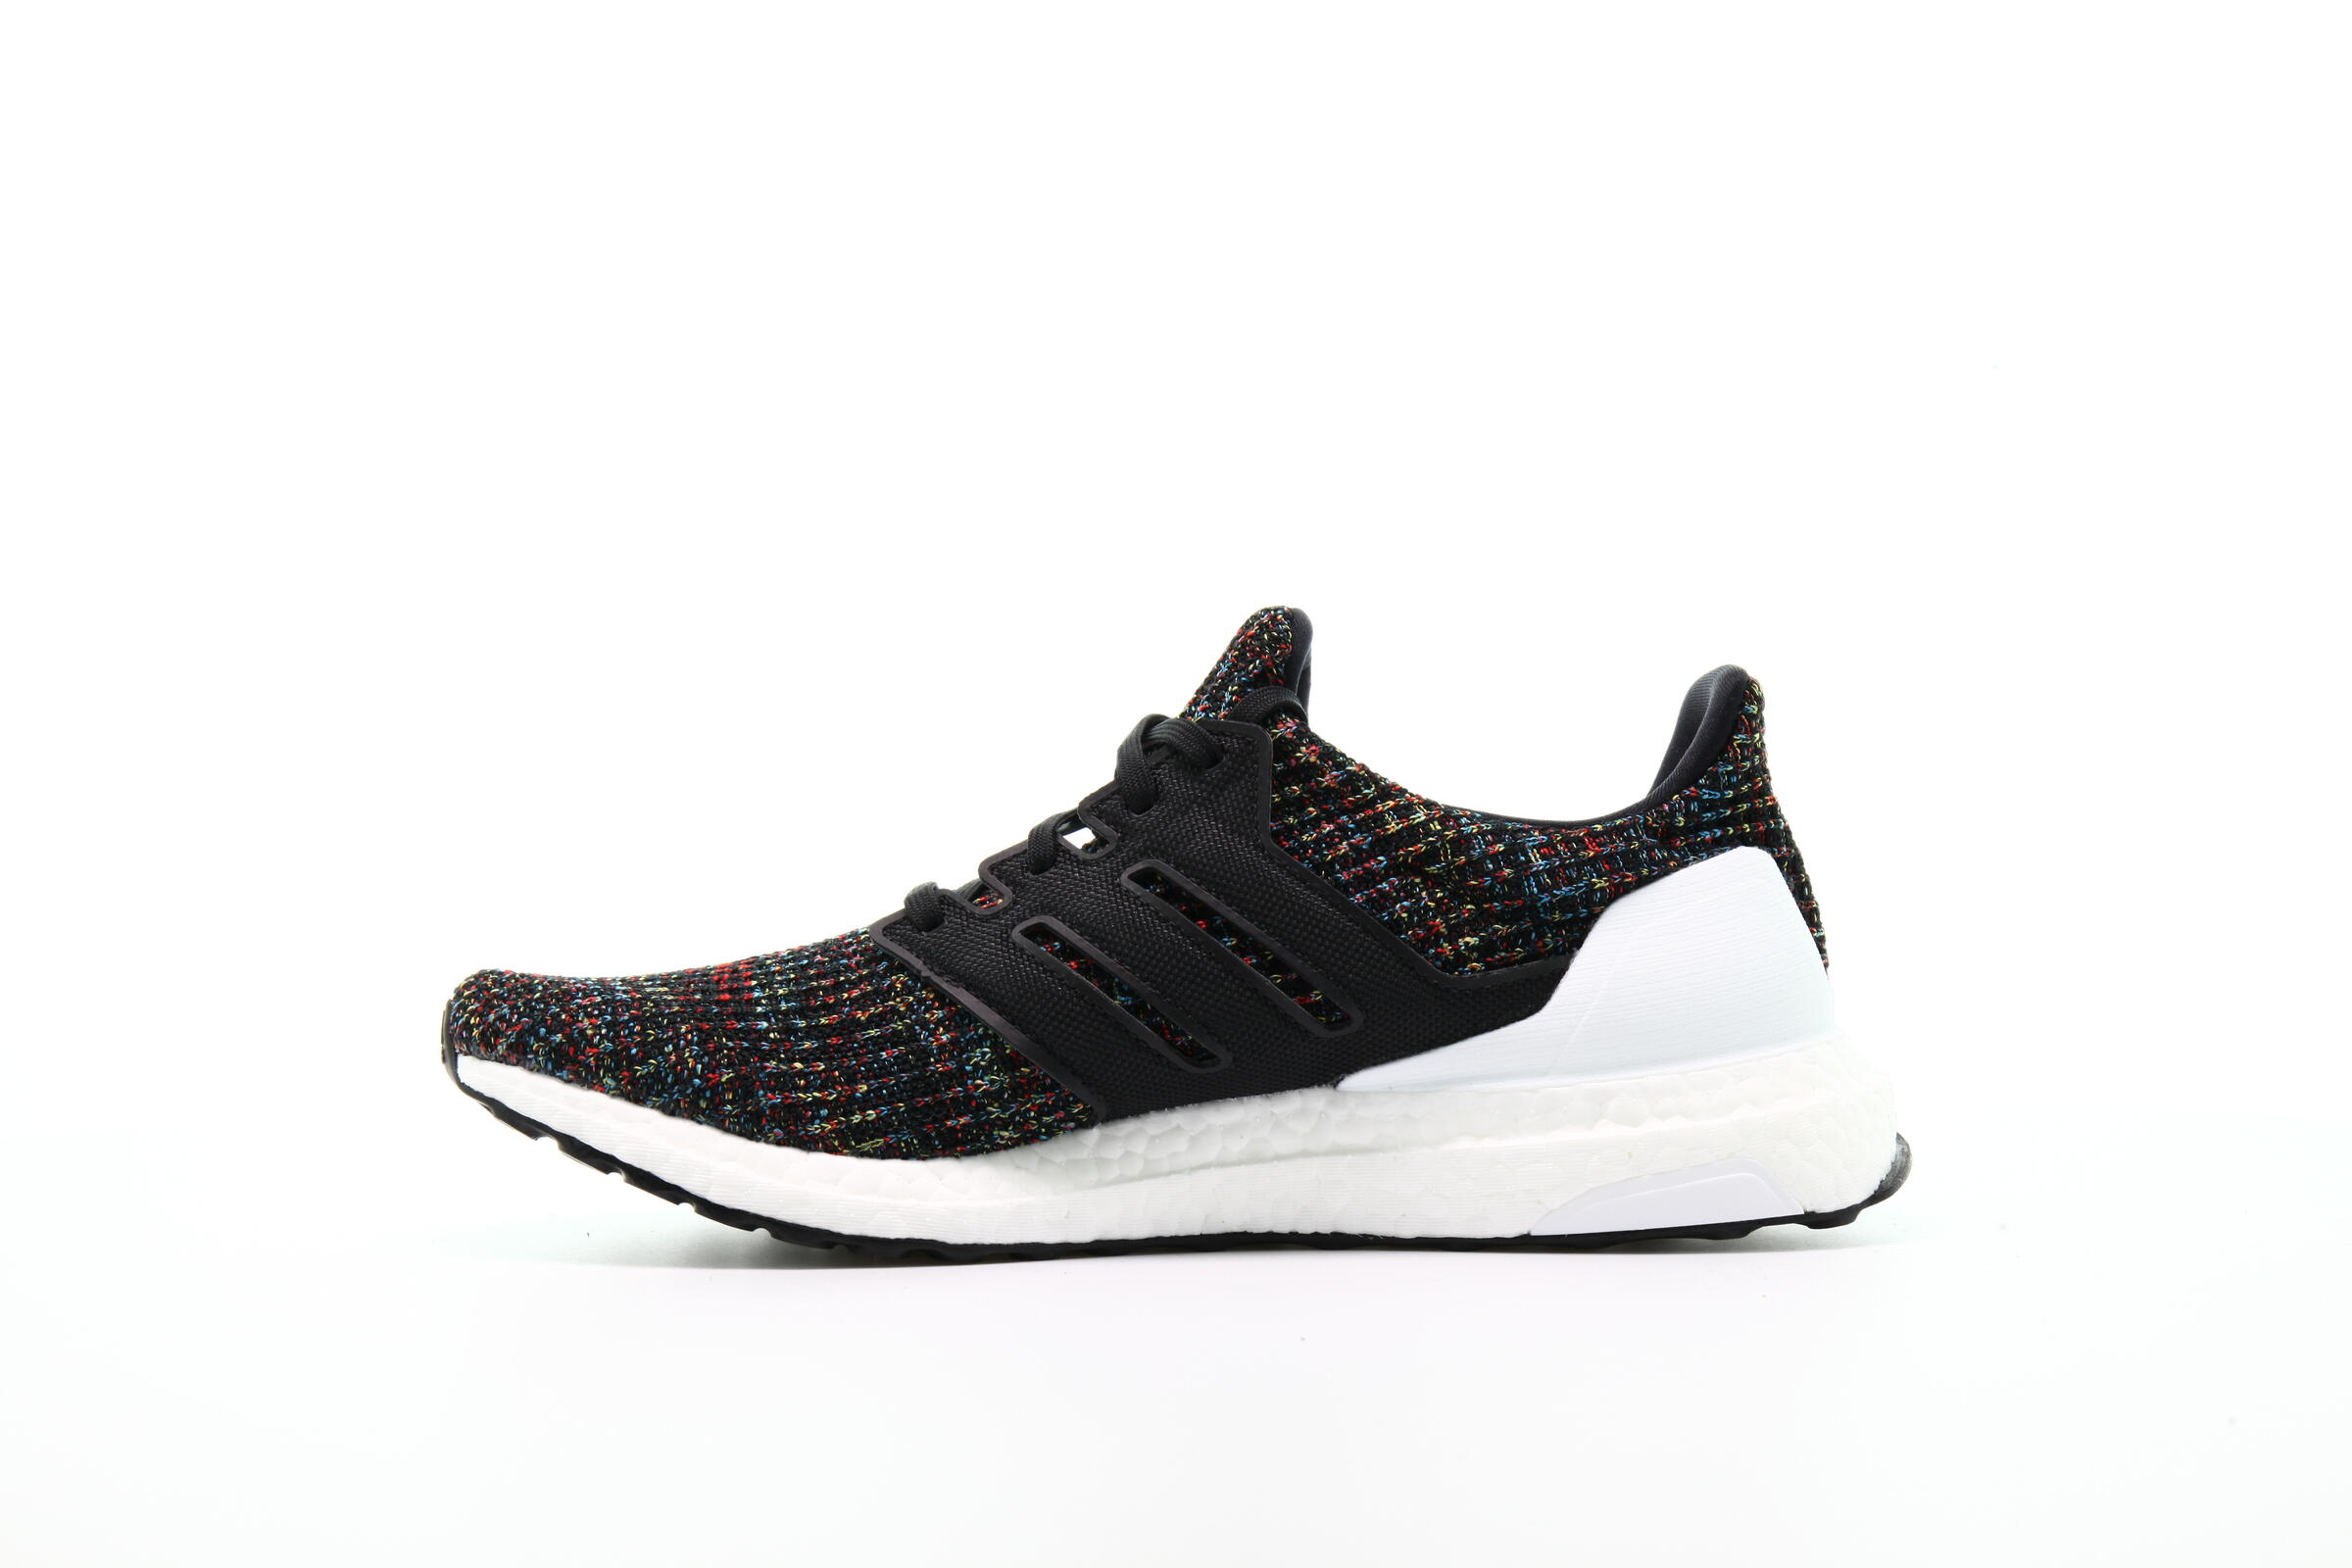 adidas Performance Ultraboost "Active Red"